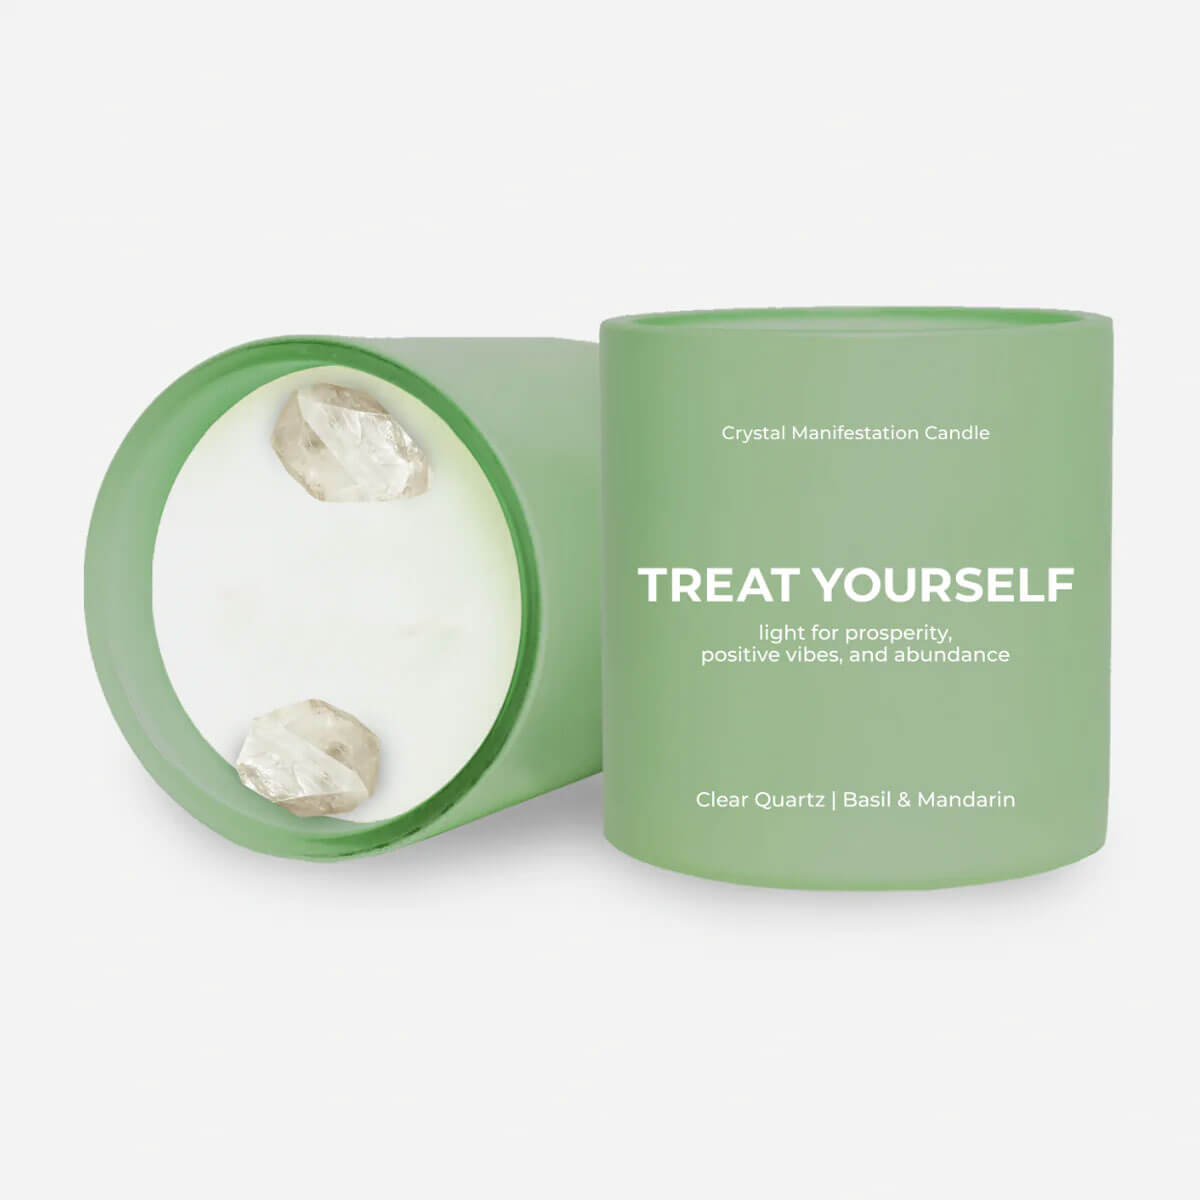 Jill & Ally Treat Yourself Crystal Manifestation Candle green front | MILK MONEY milkmoney.co | cute gifts for women